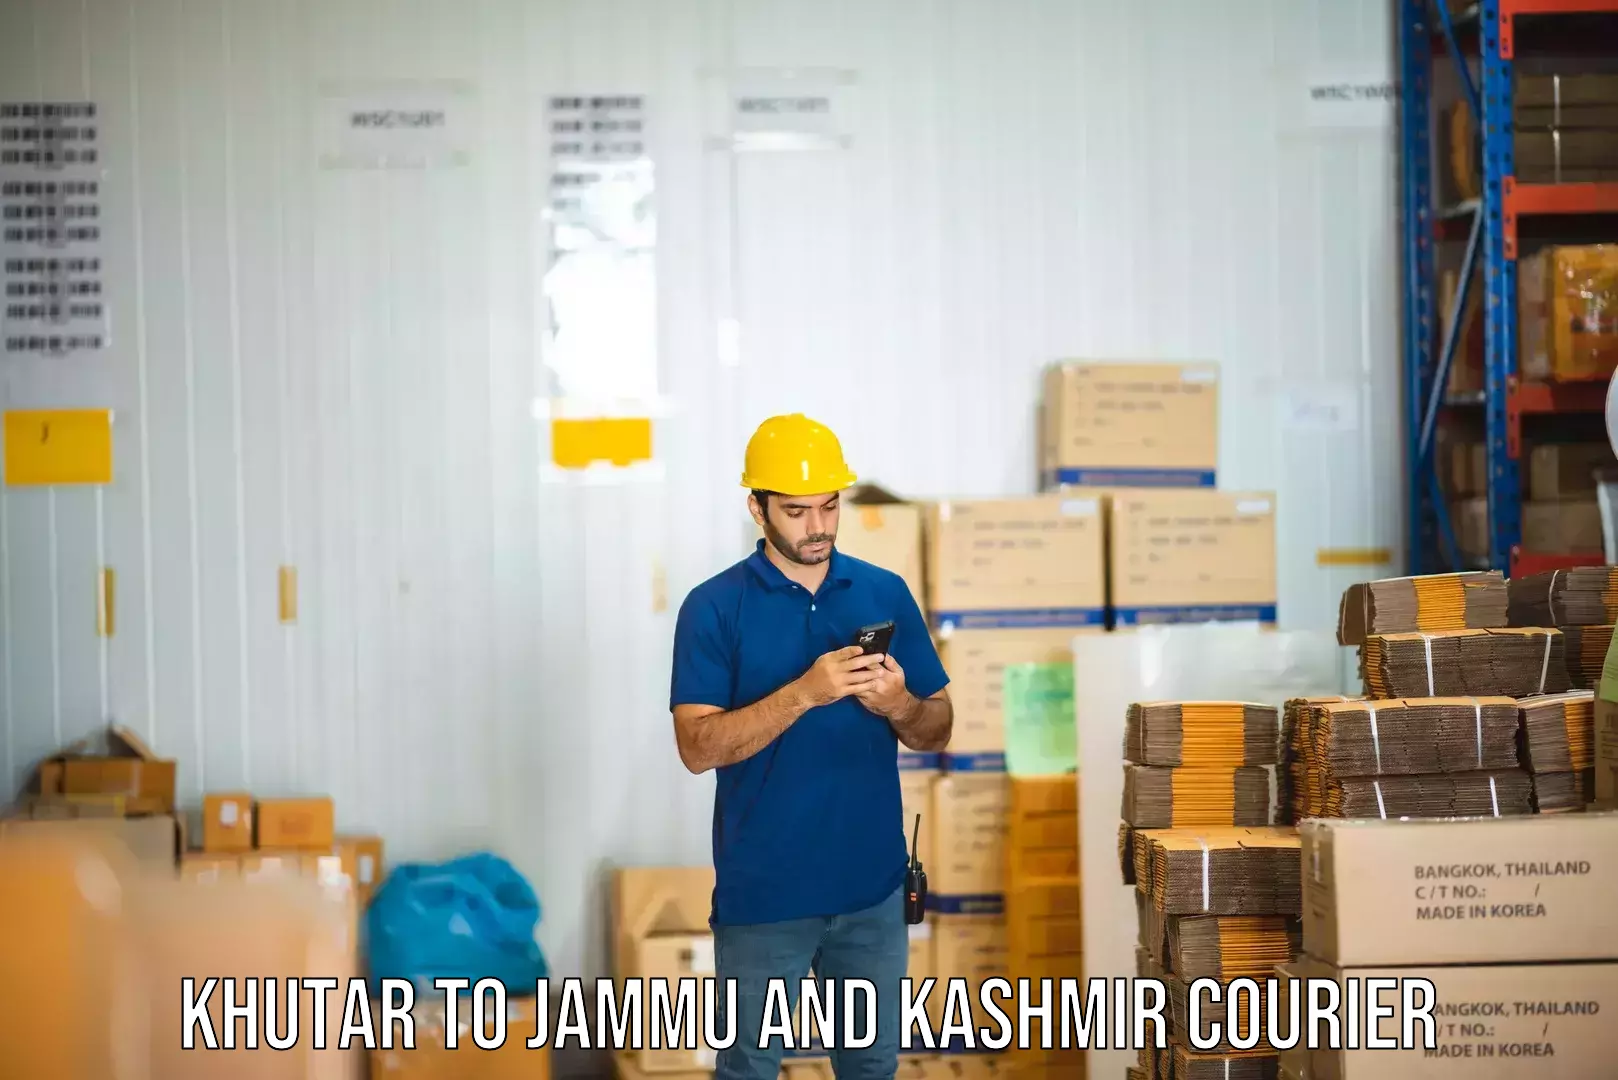 Shipping and handling in Khutar to Jammu and Kashmir